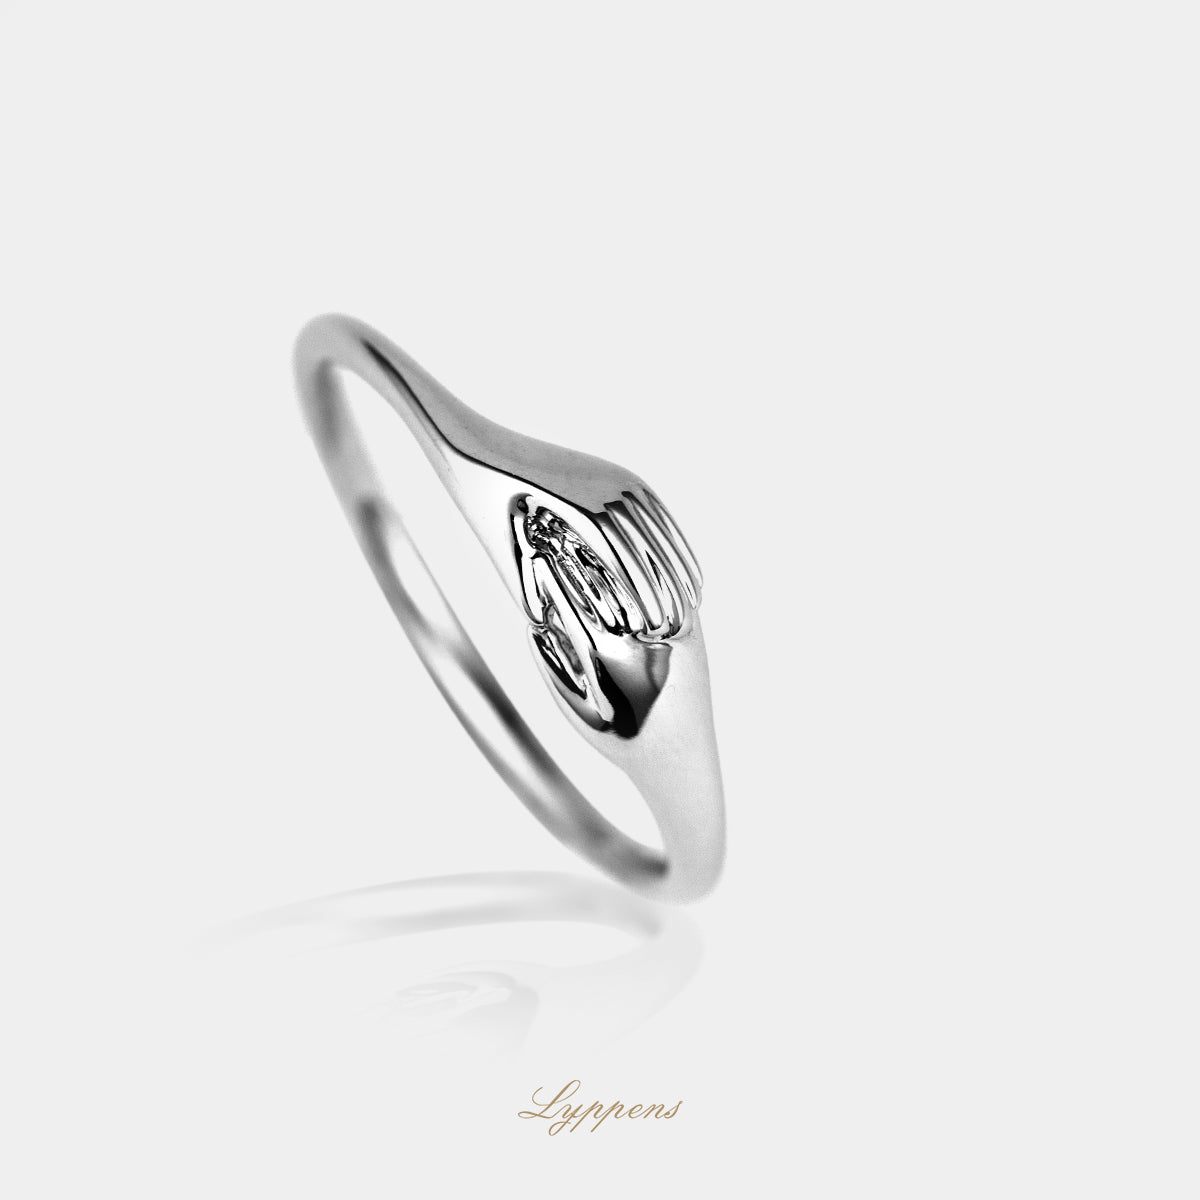 White gold ring with interlocked hands